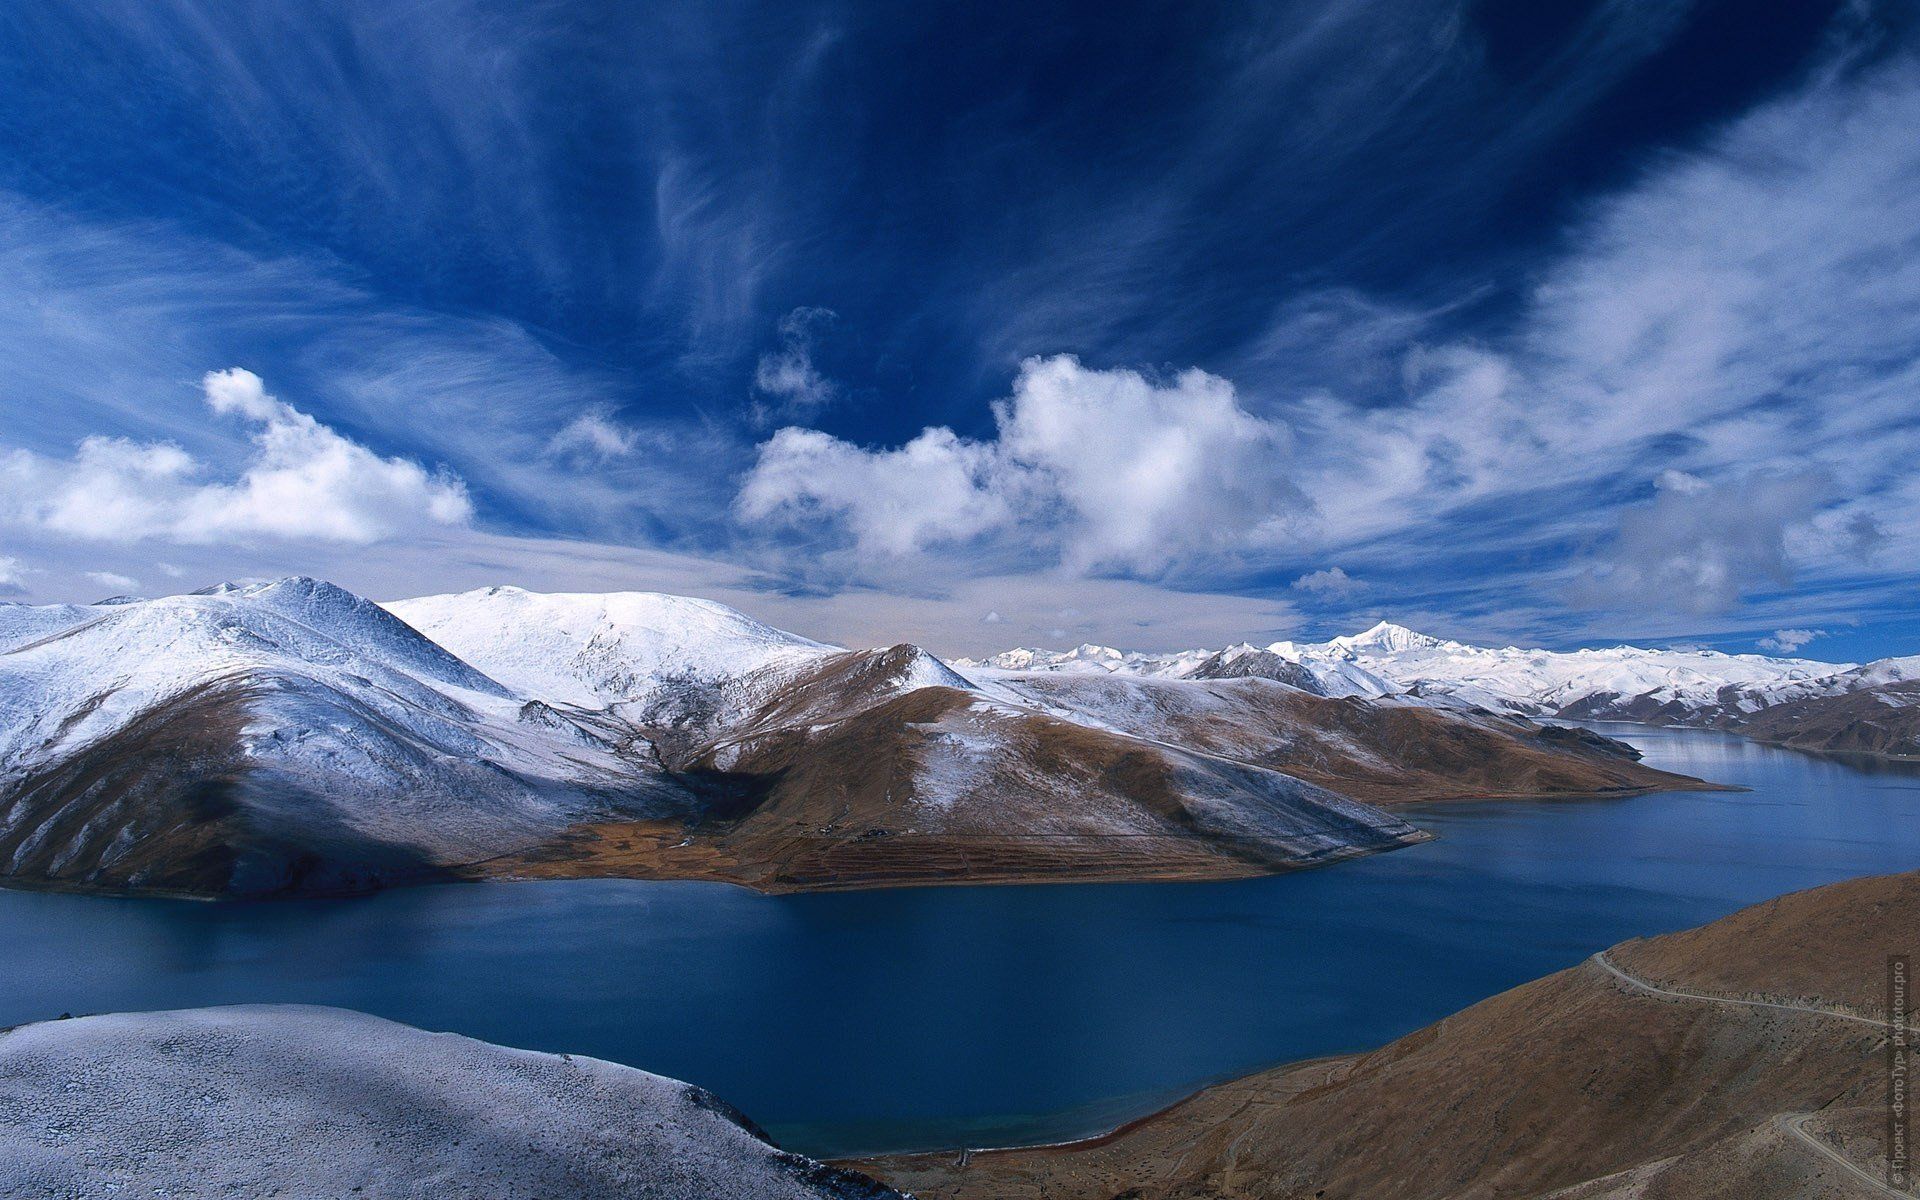 Lake Pangong in winter. Photo tour to Tibet for the Winter Mysteries in Ladakh, Stok and Matho monasteries, 01.03. - 03/10/2020